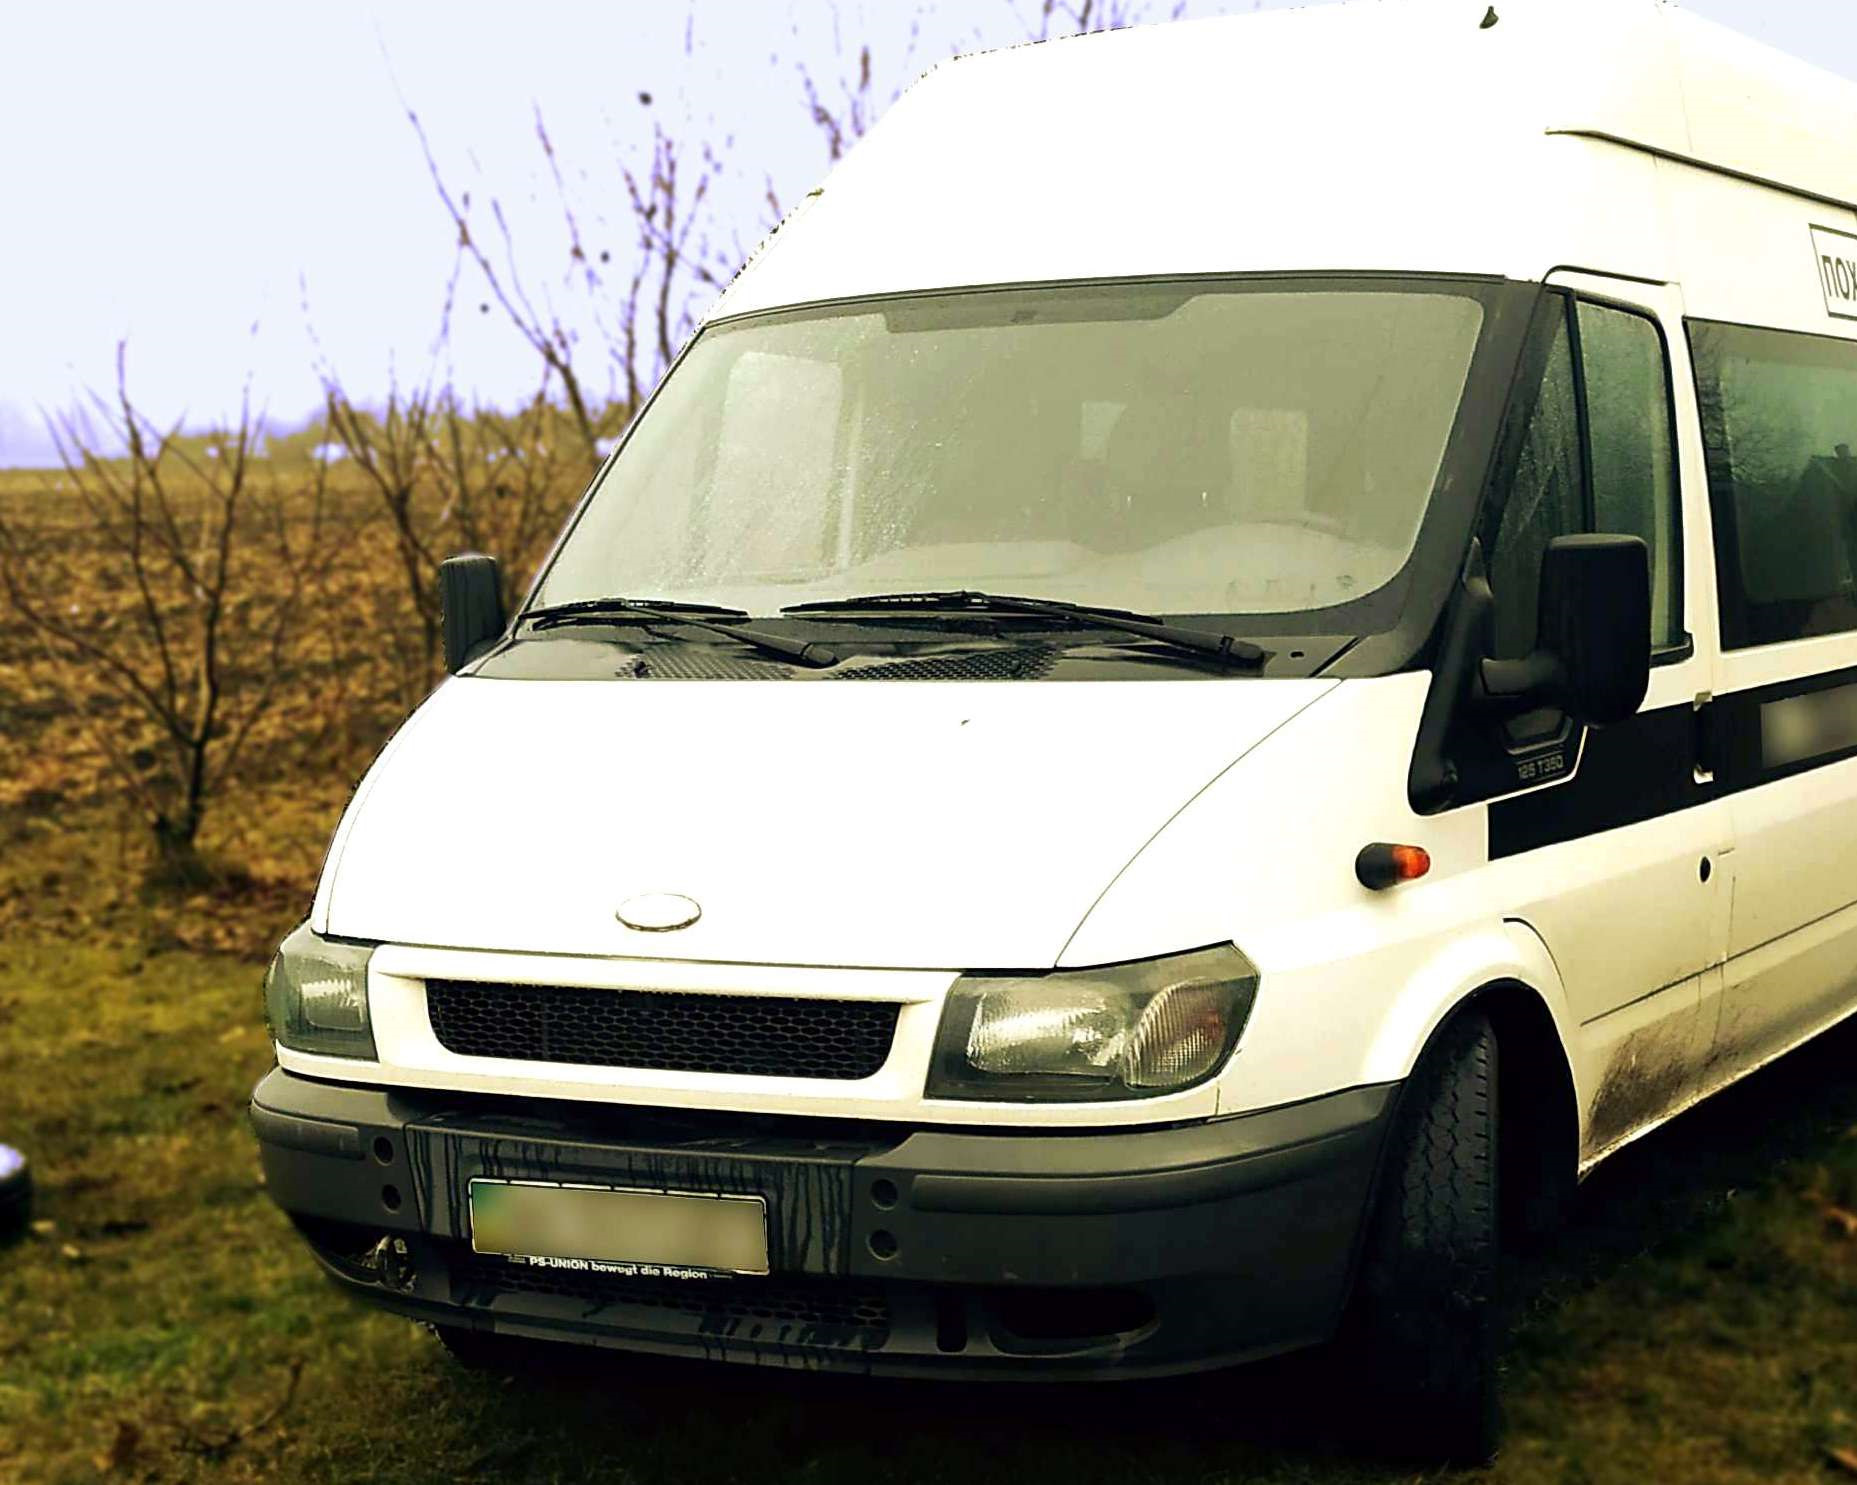 Форд транзит 2.0 2000 2006. Ford Transit 2000-2006. Ford Транзит 2000. Форд Transit 2000. Ford Transit 2006.